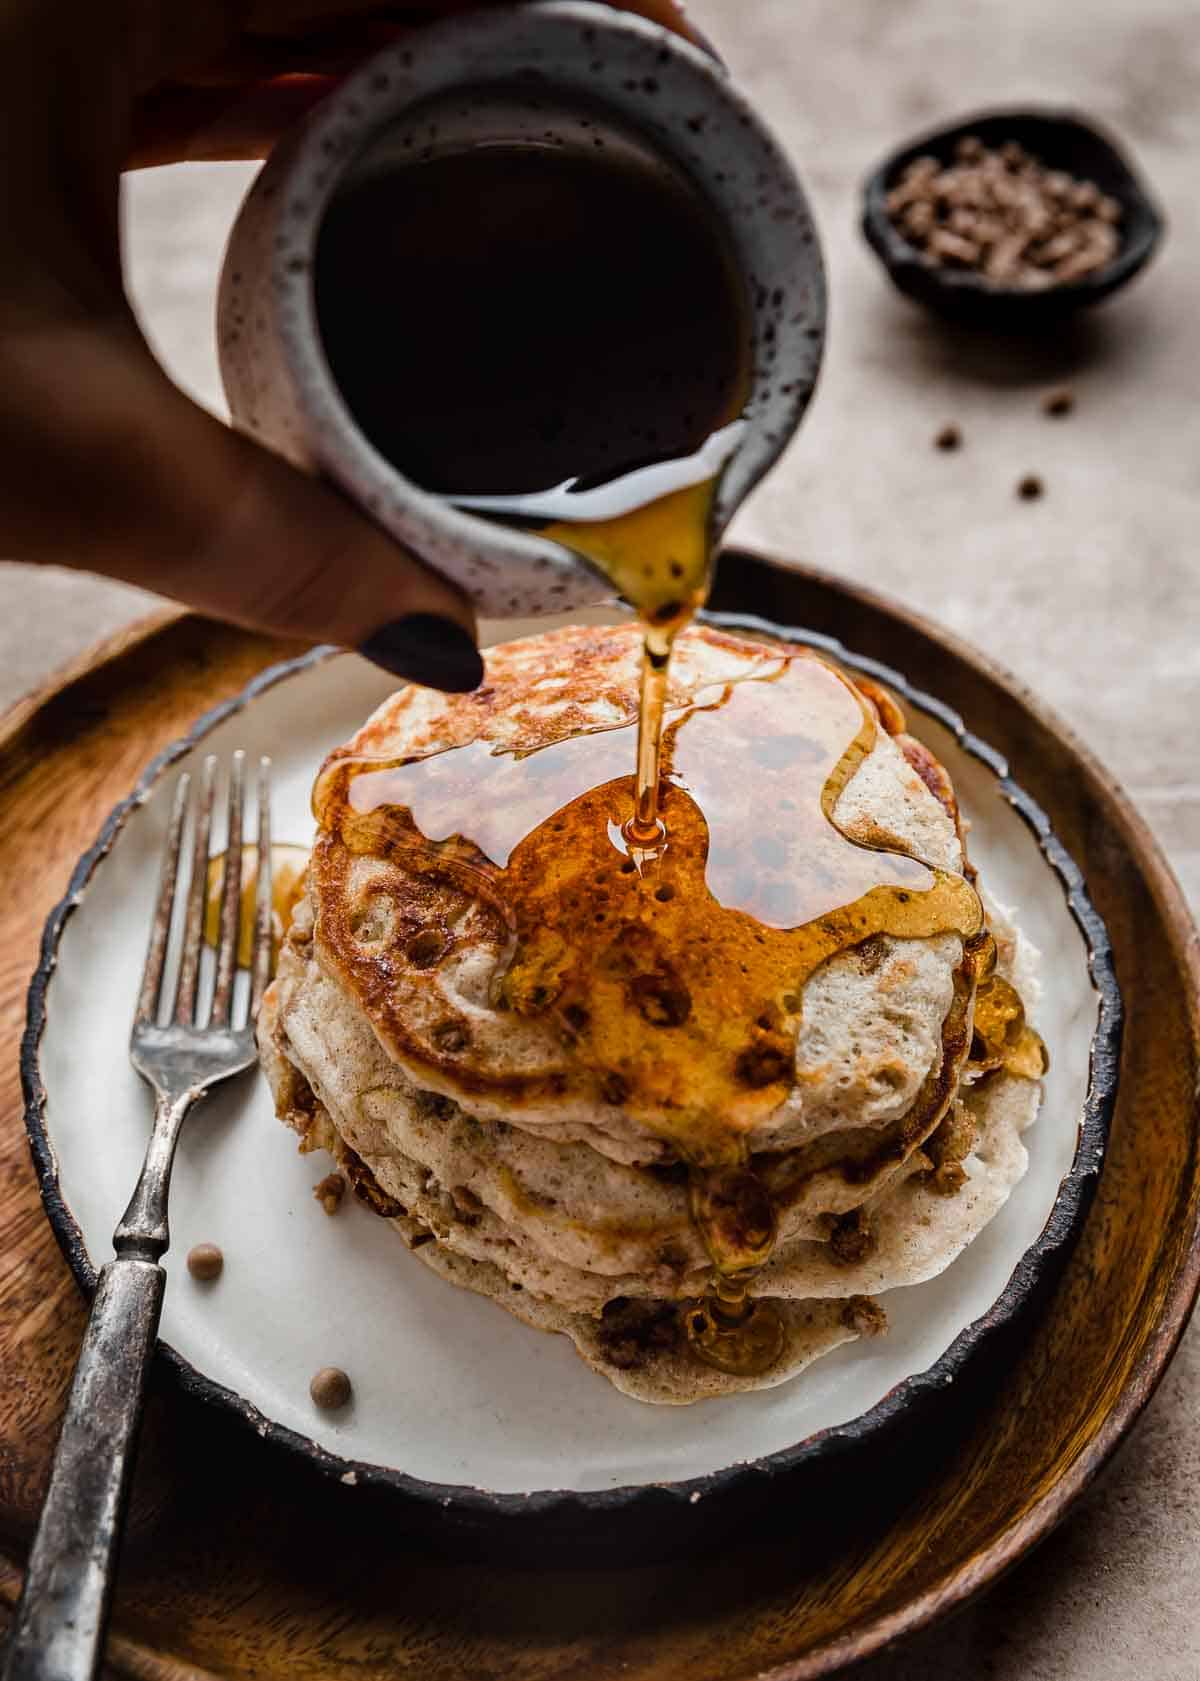 Maple syrup being poured overtop a stack of Cinnamon Chip Pancakes.